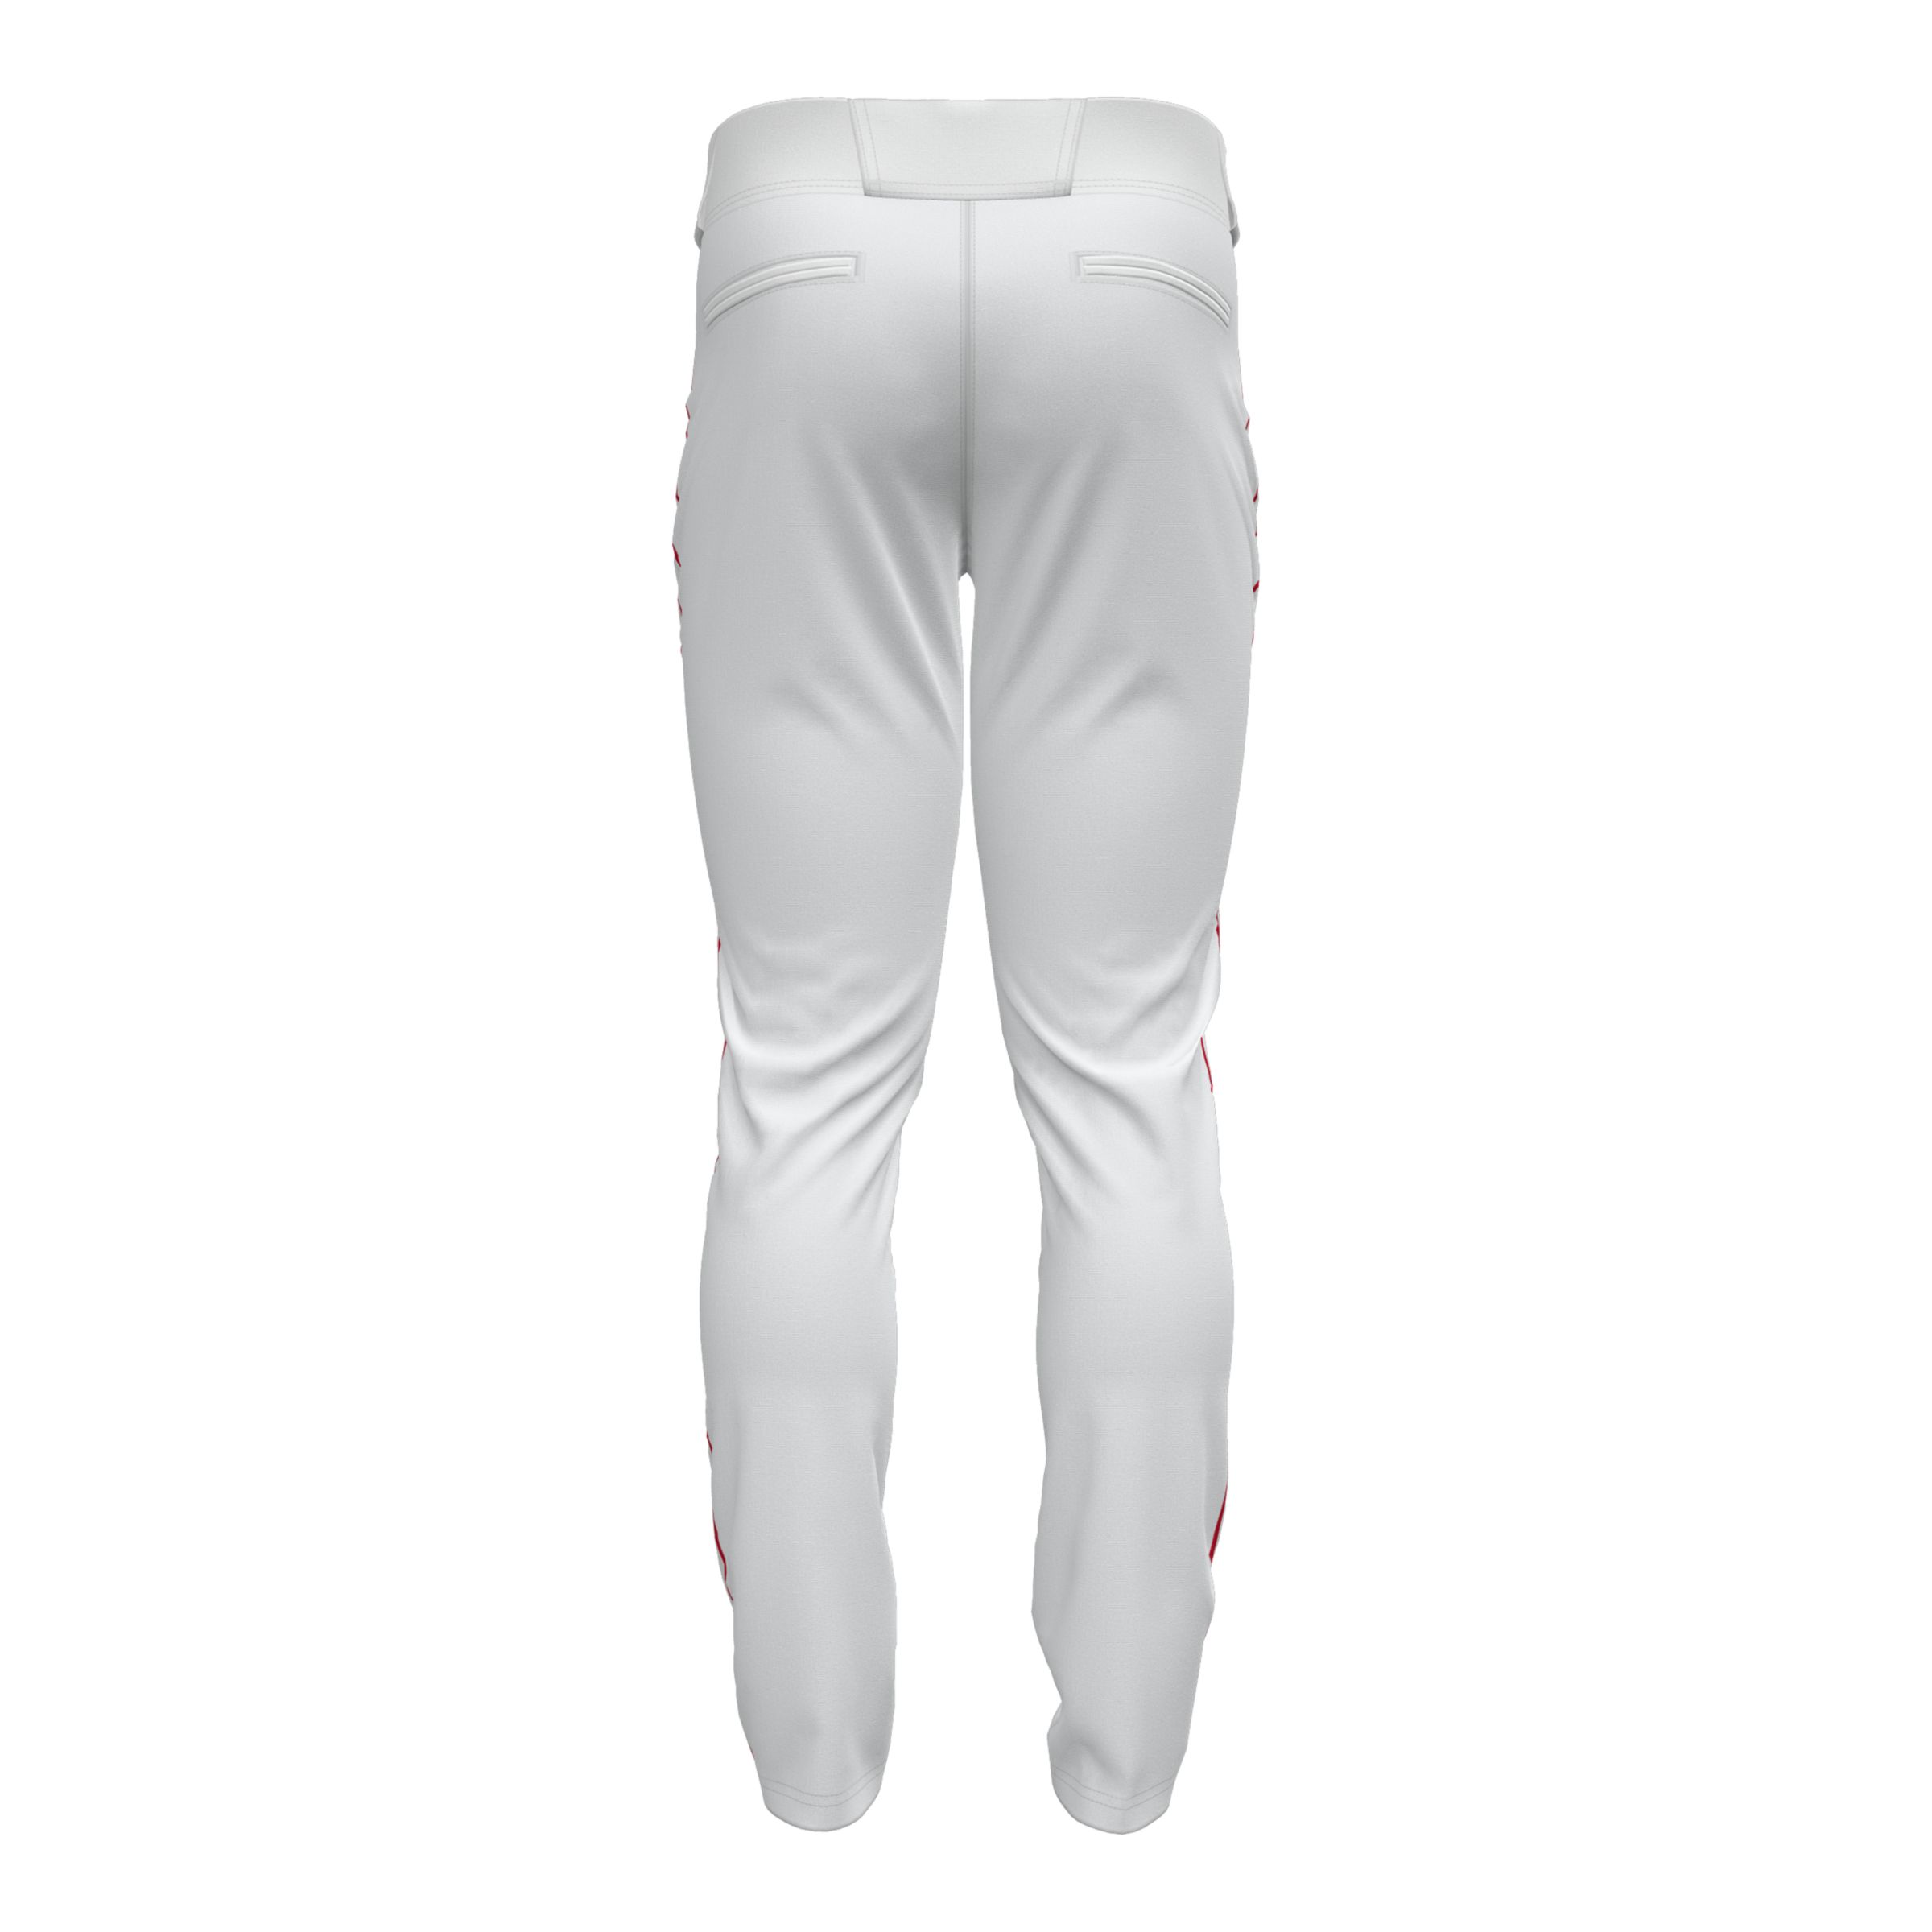 Adversary 2.0 Tapered Piped Pant - Men's - Baseball, - NB Team Sports - US